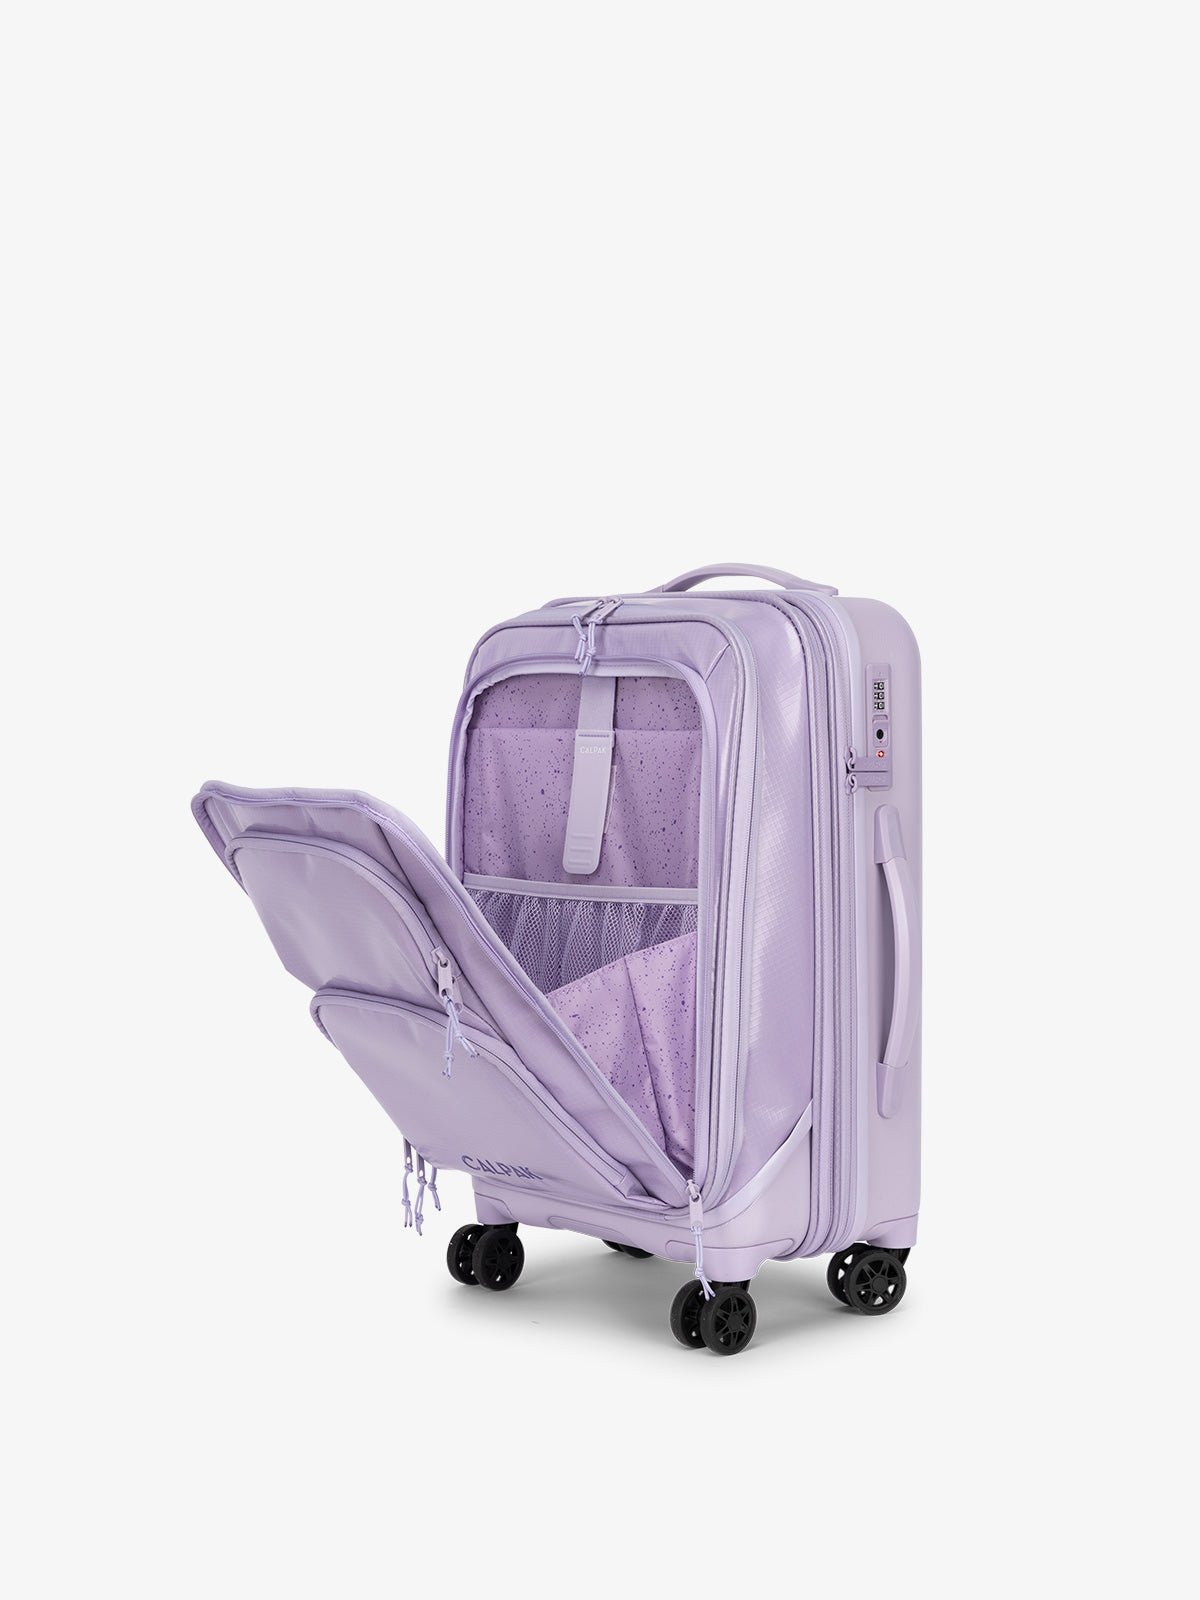 CALPAK Terra Carry-On expandable and water resistant Luggage with padded laptop compartment and 360 spinner wheels in light purple